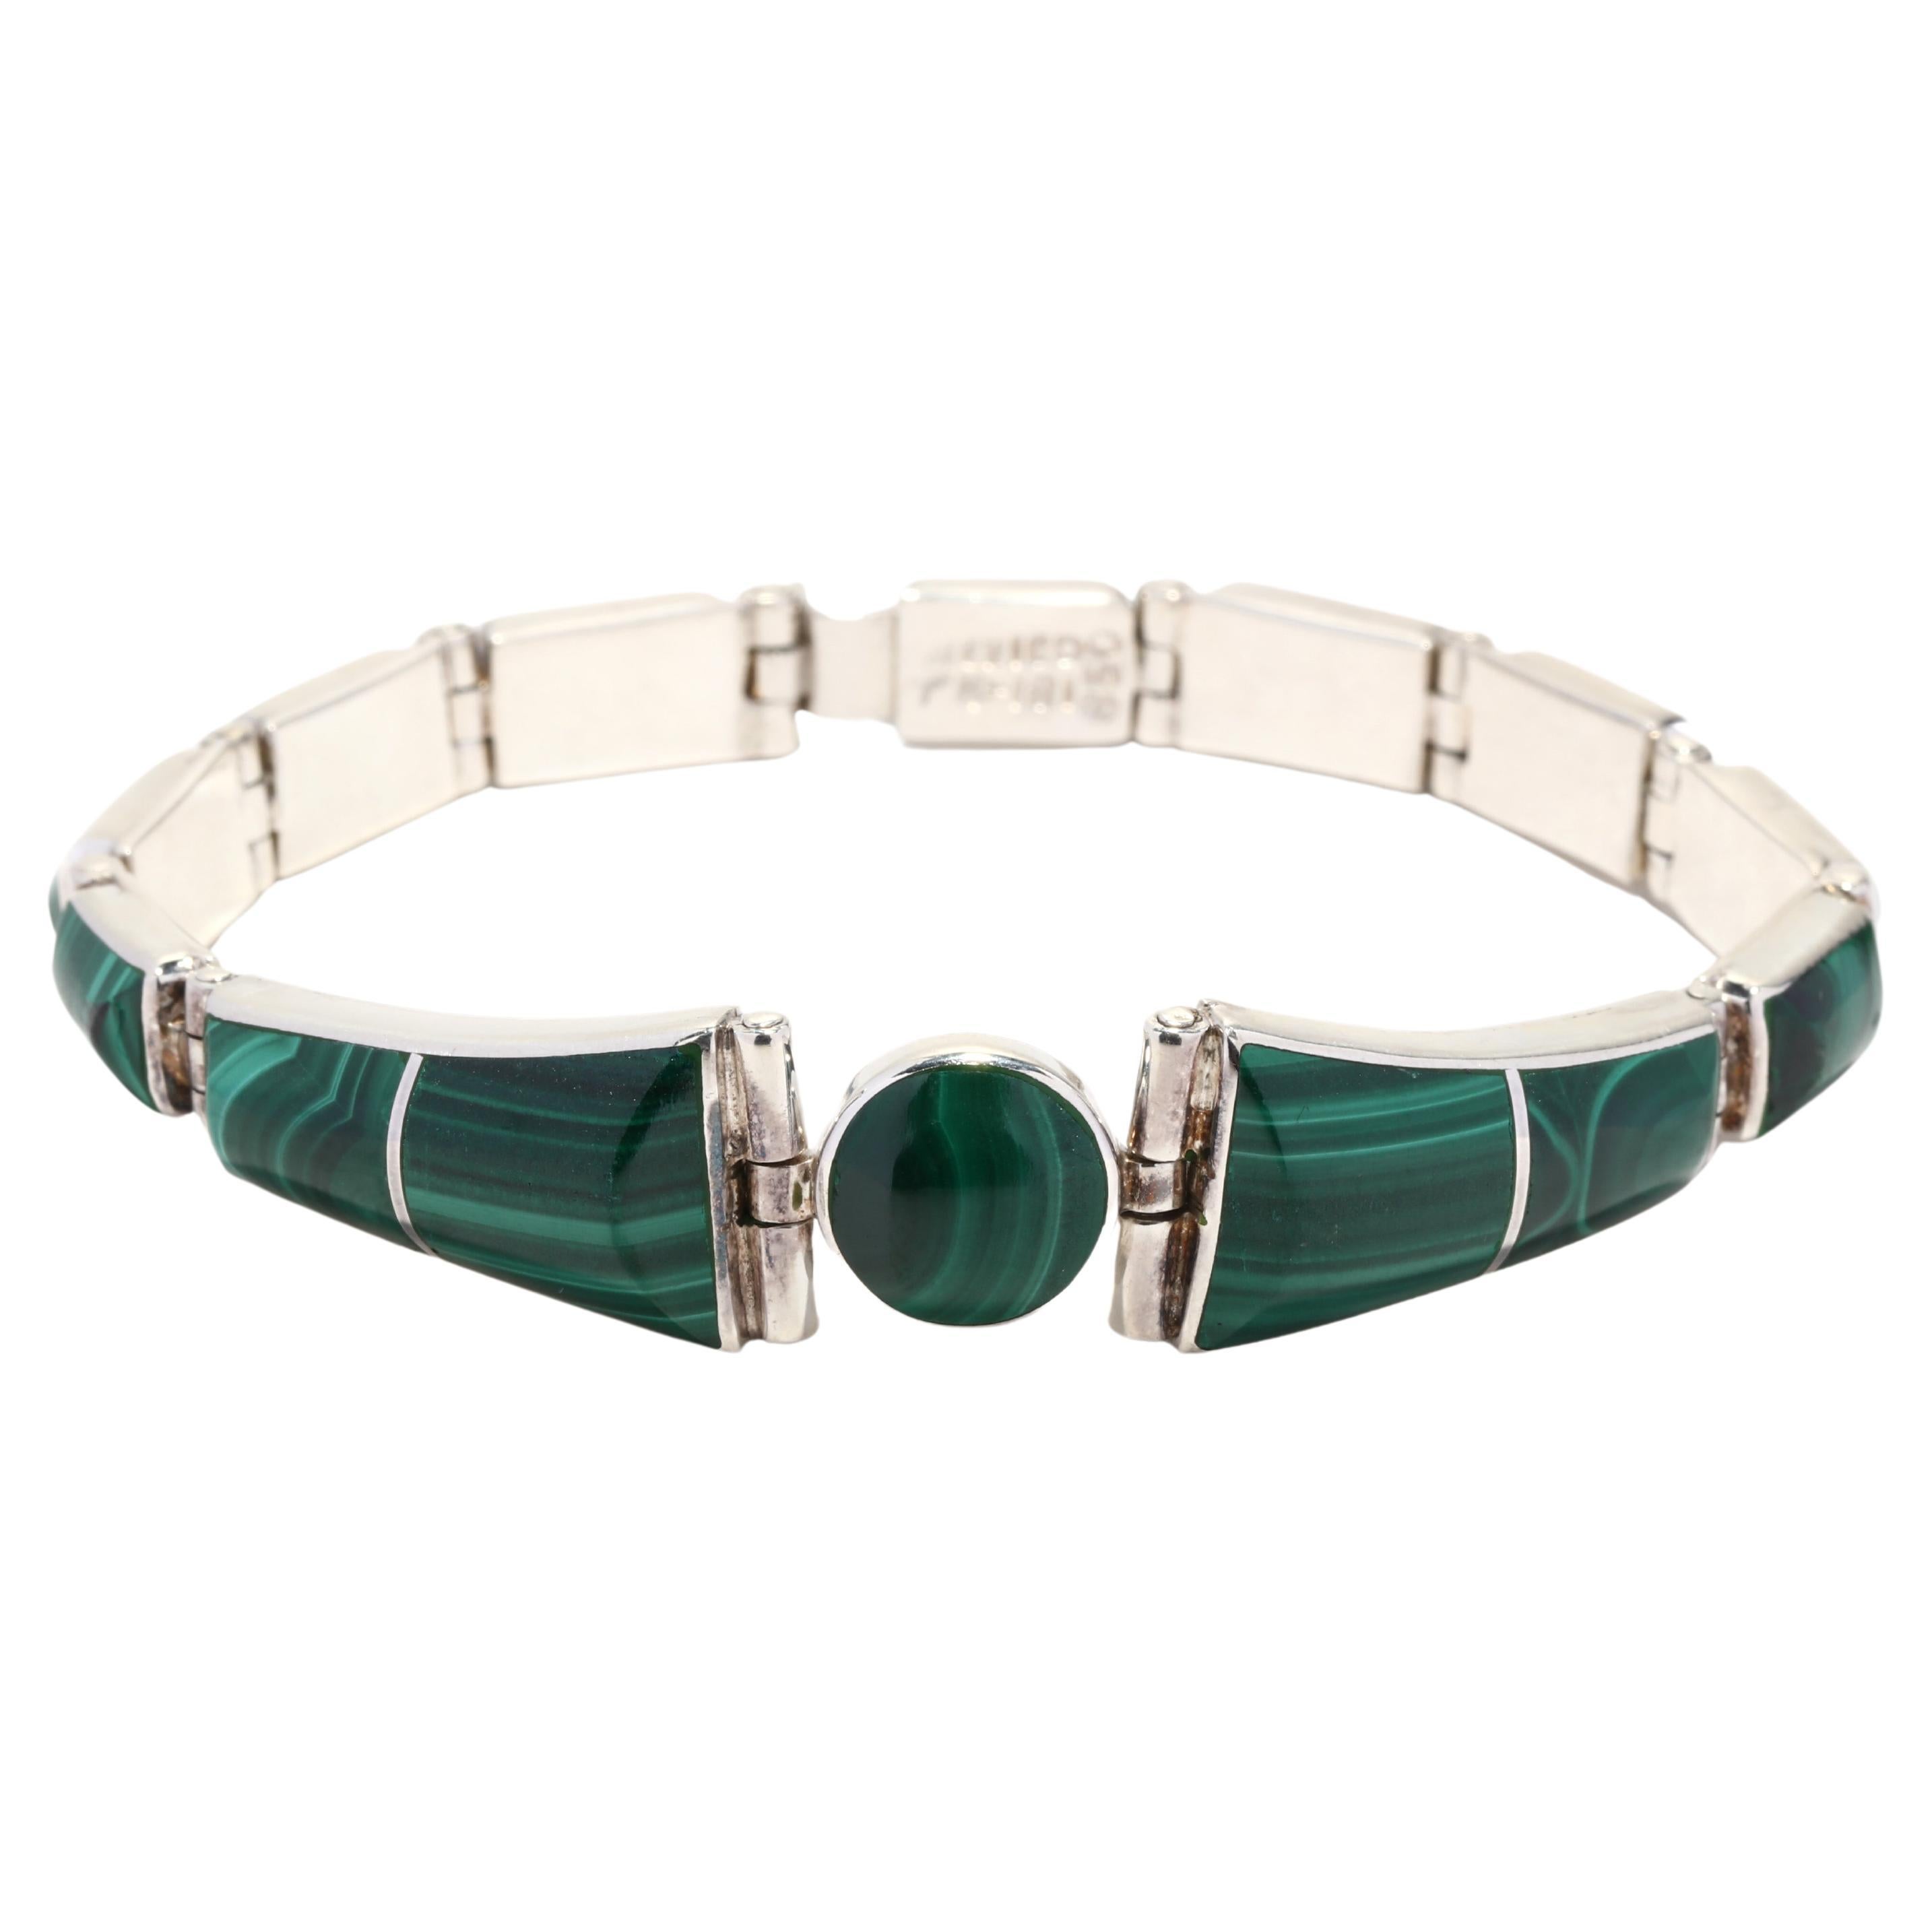 Vintage Inlaid Malachite Bracelet, Sterling Silver, Mexican